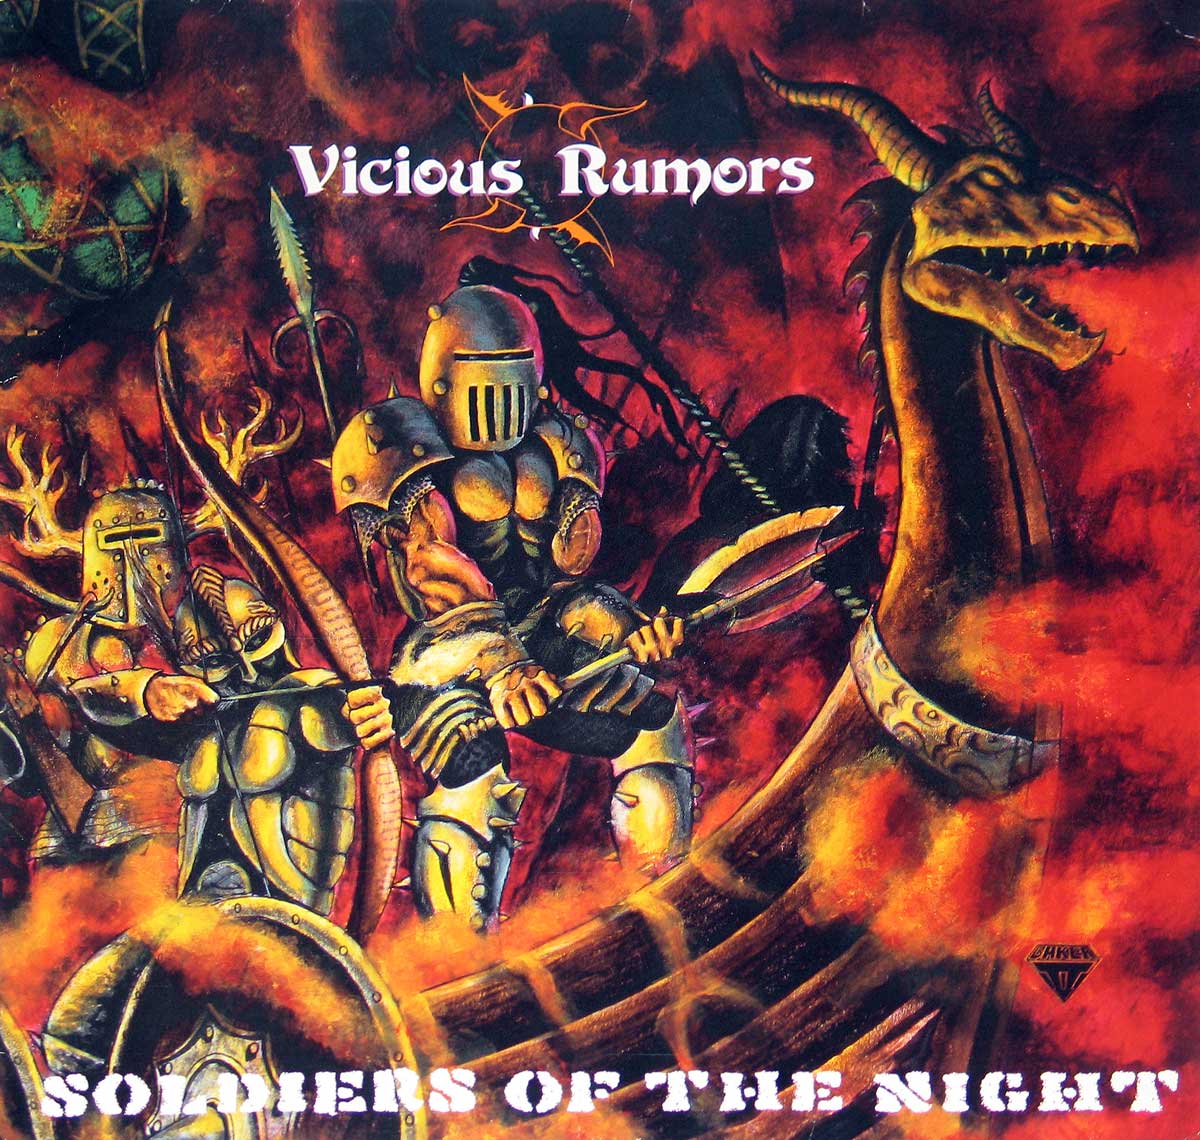 large album front cover photo of: Vicious Rumors Soldiers of the Night 